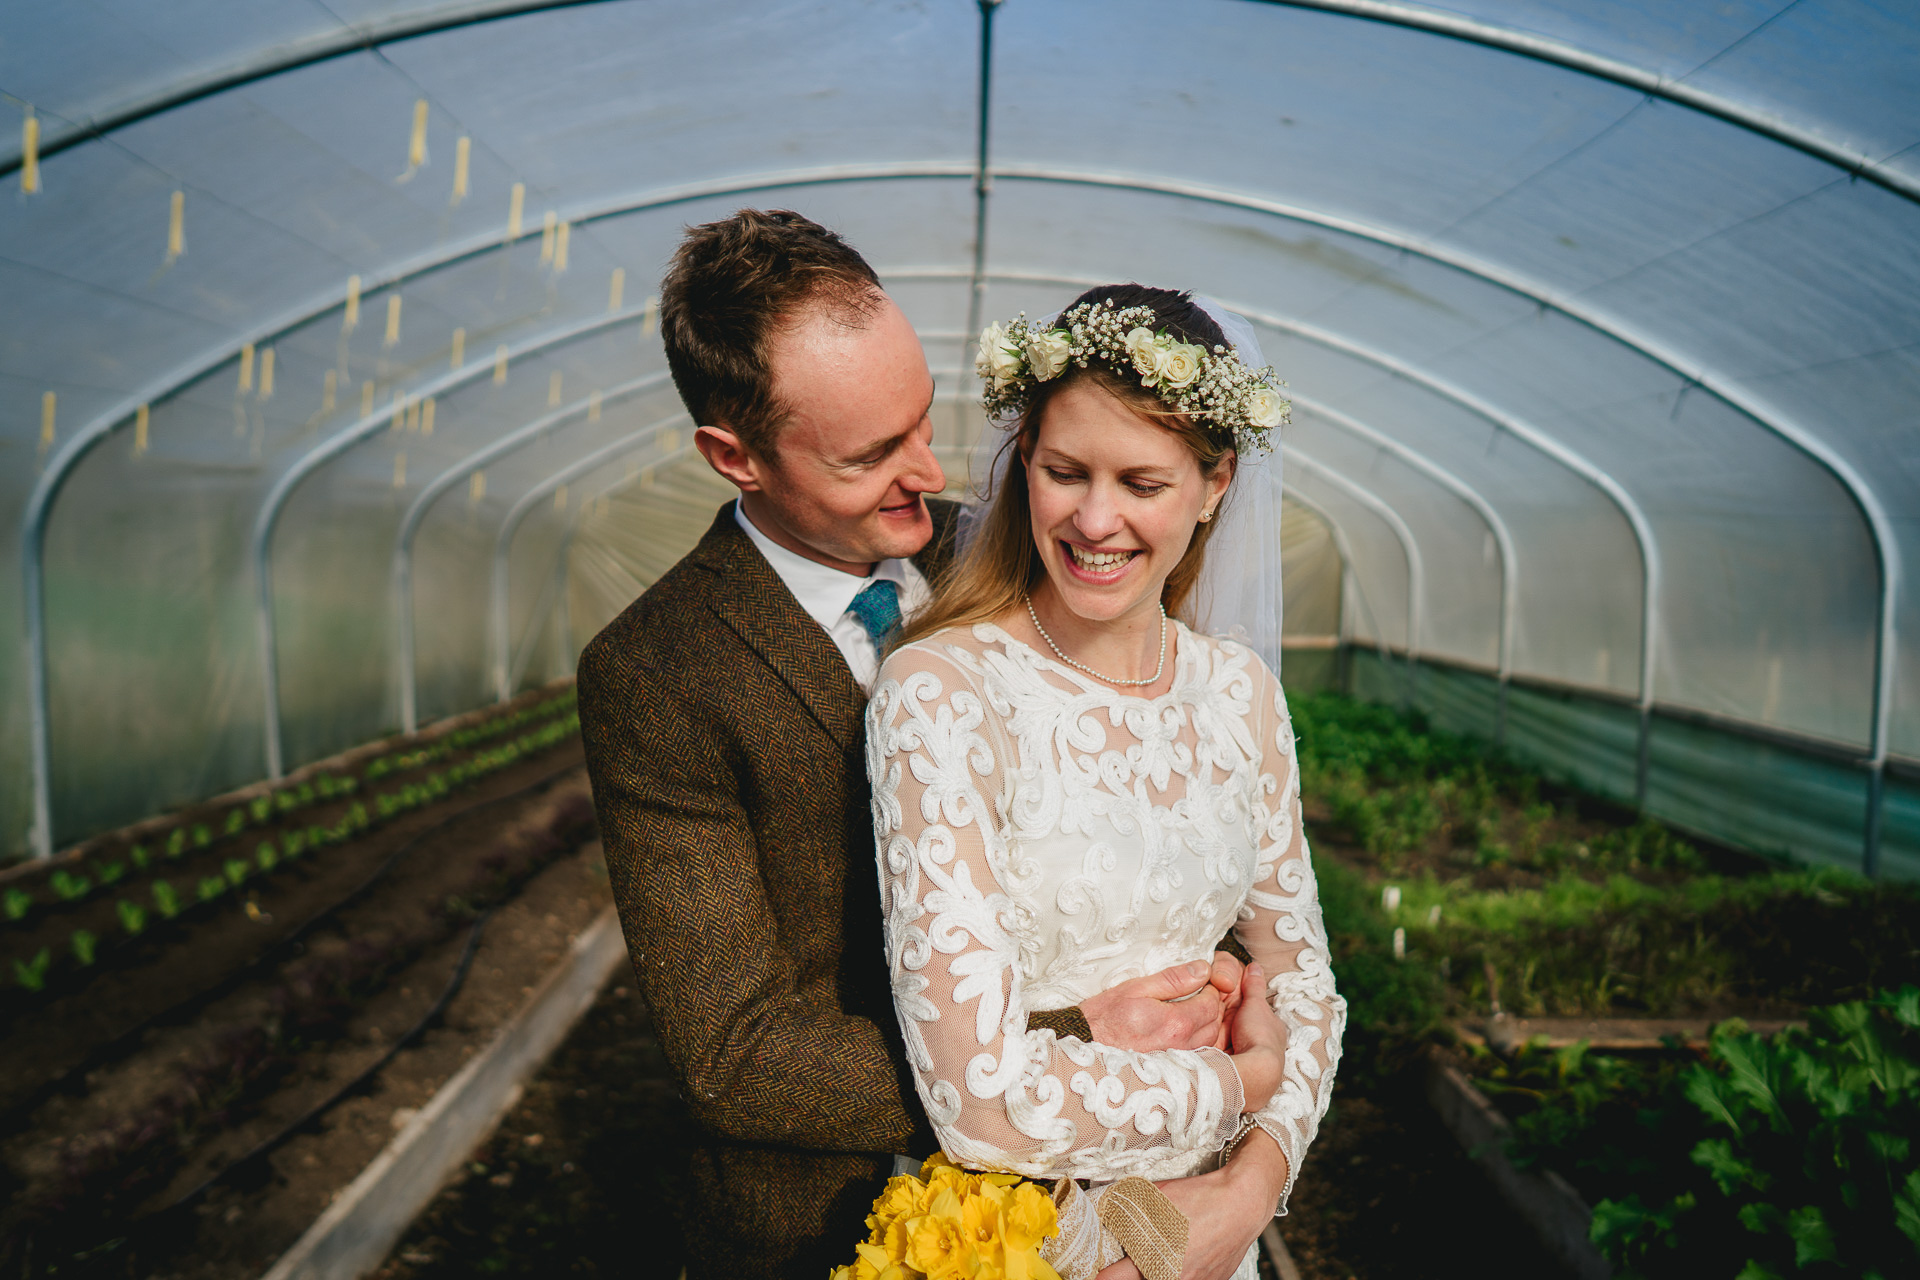 Bride and groom cuddling together in a poly tunnel